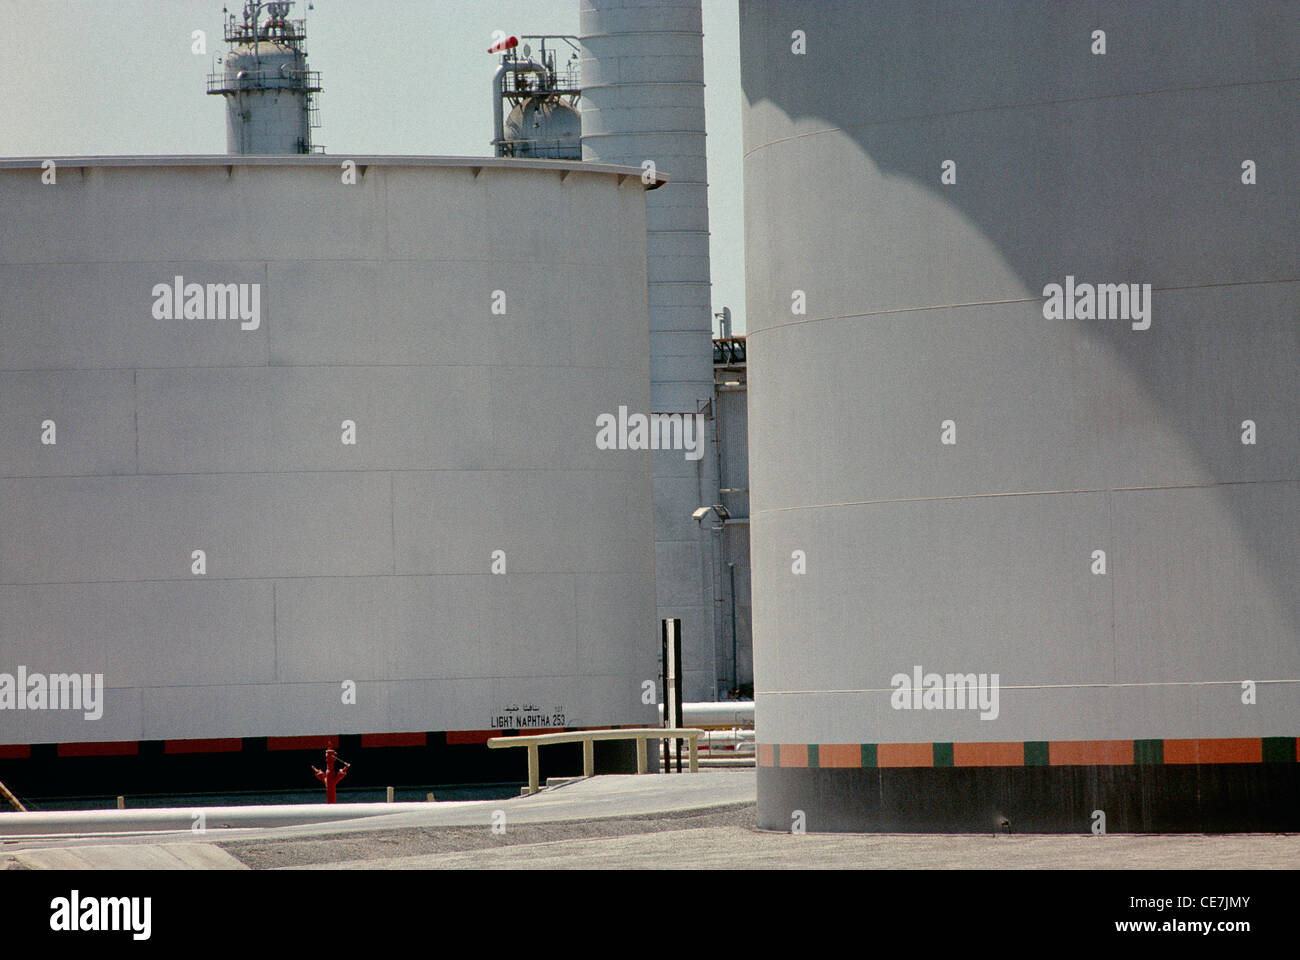 Oil storage tanks in the tank farm at the largest oil refinery in the world, located at Ras Tanura, in eastern Saudi Arabia. Stock Photo